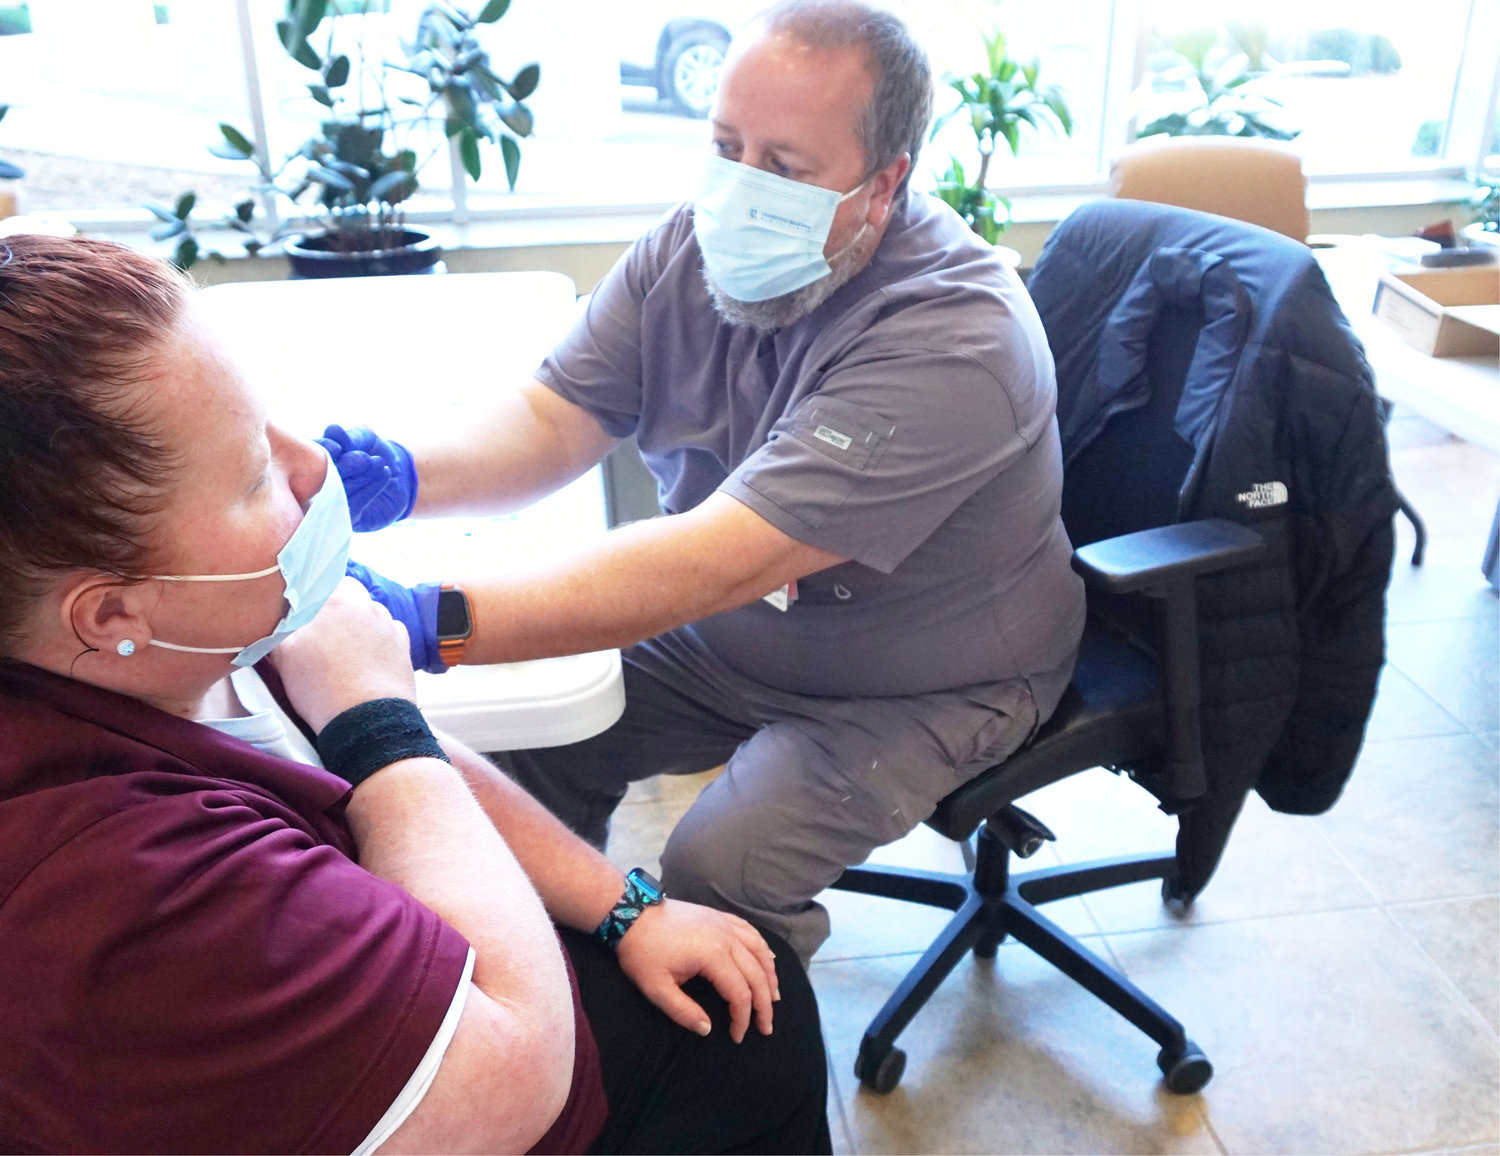 Melanie Jacobson with environmental services gets a vaccine from head pharmacist Casey White. The vaccine clinic hours will be changing beginning March 10.